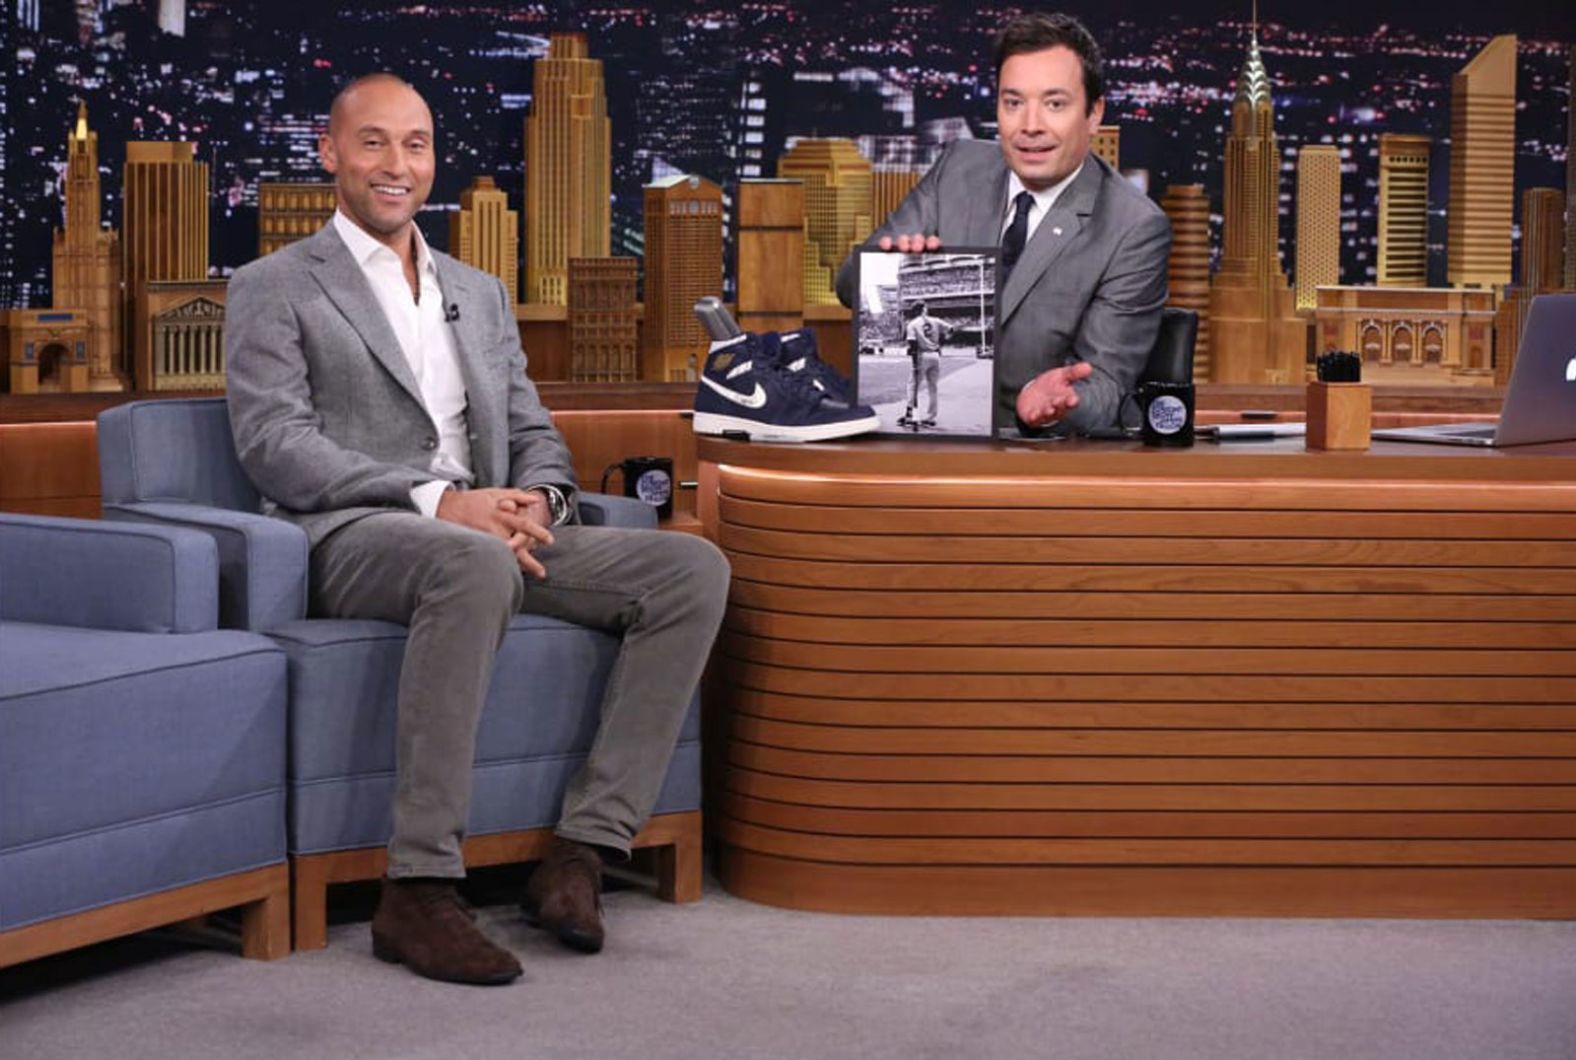 Jeter is interviewed by "Tonight Show" host Jimmy Fallon in October 2014.